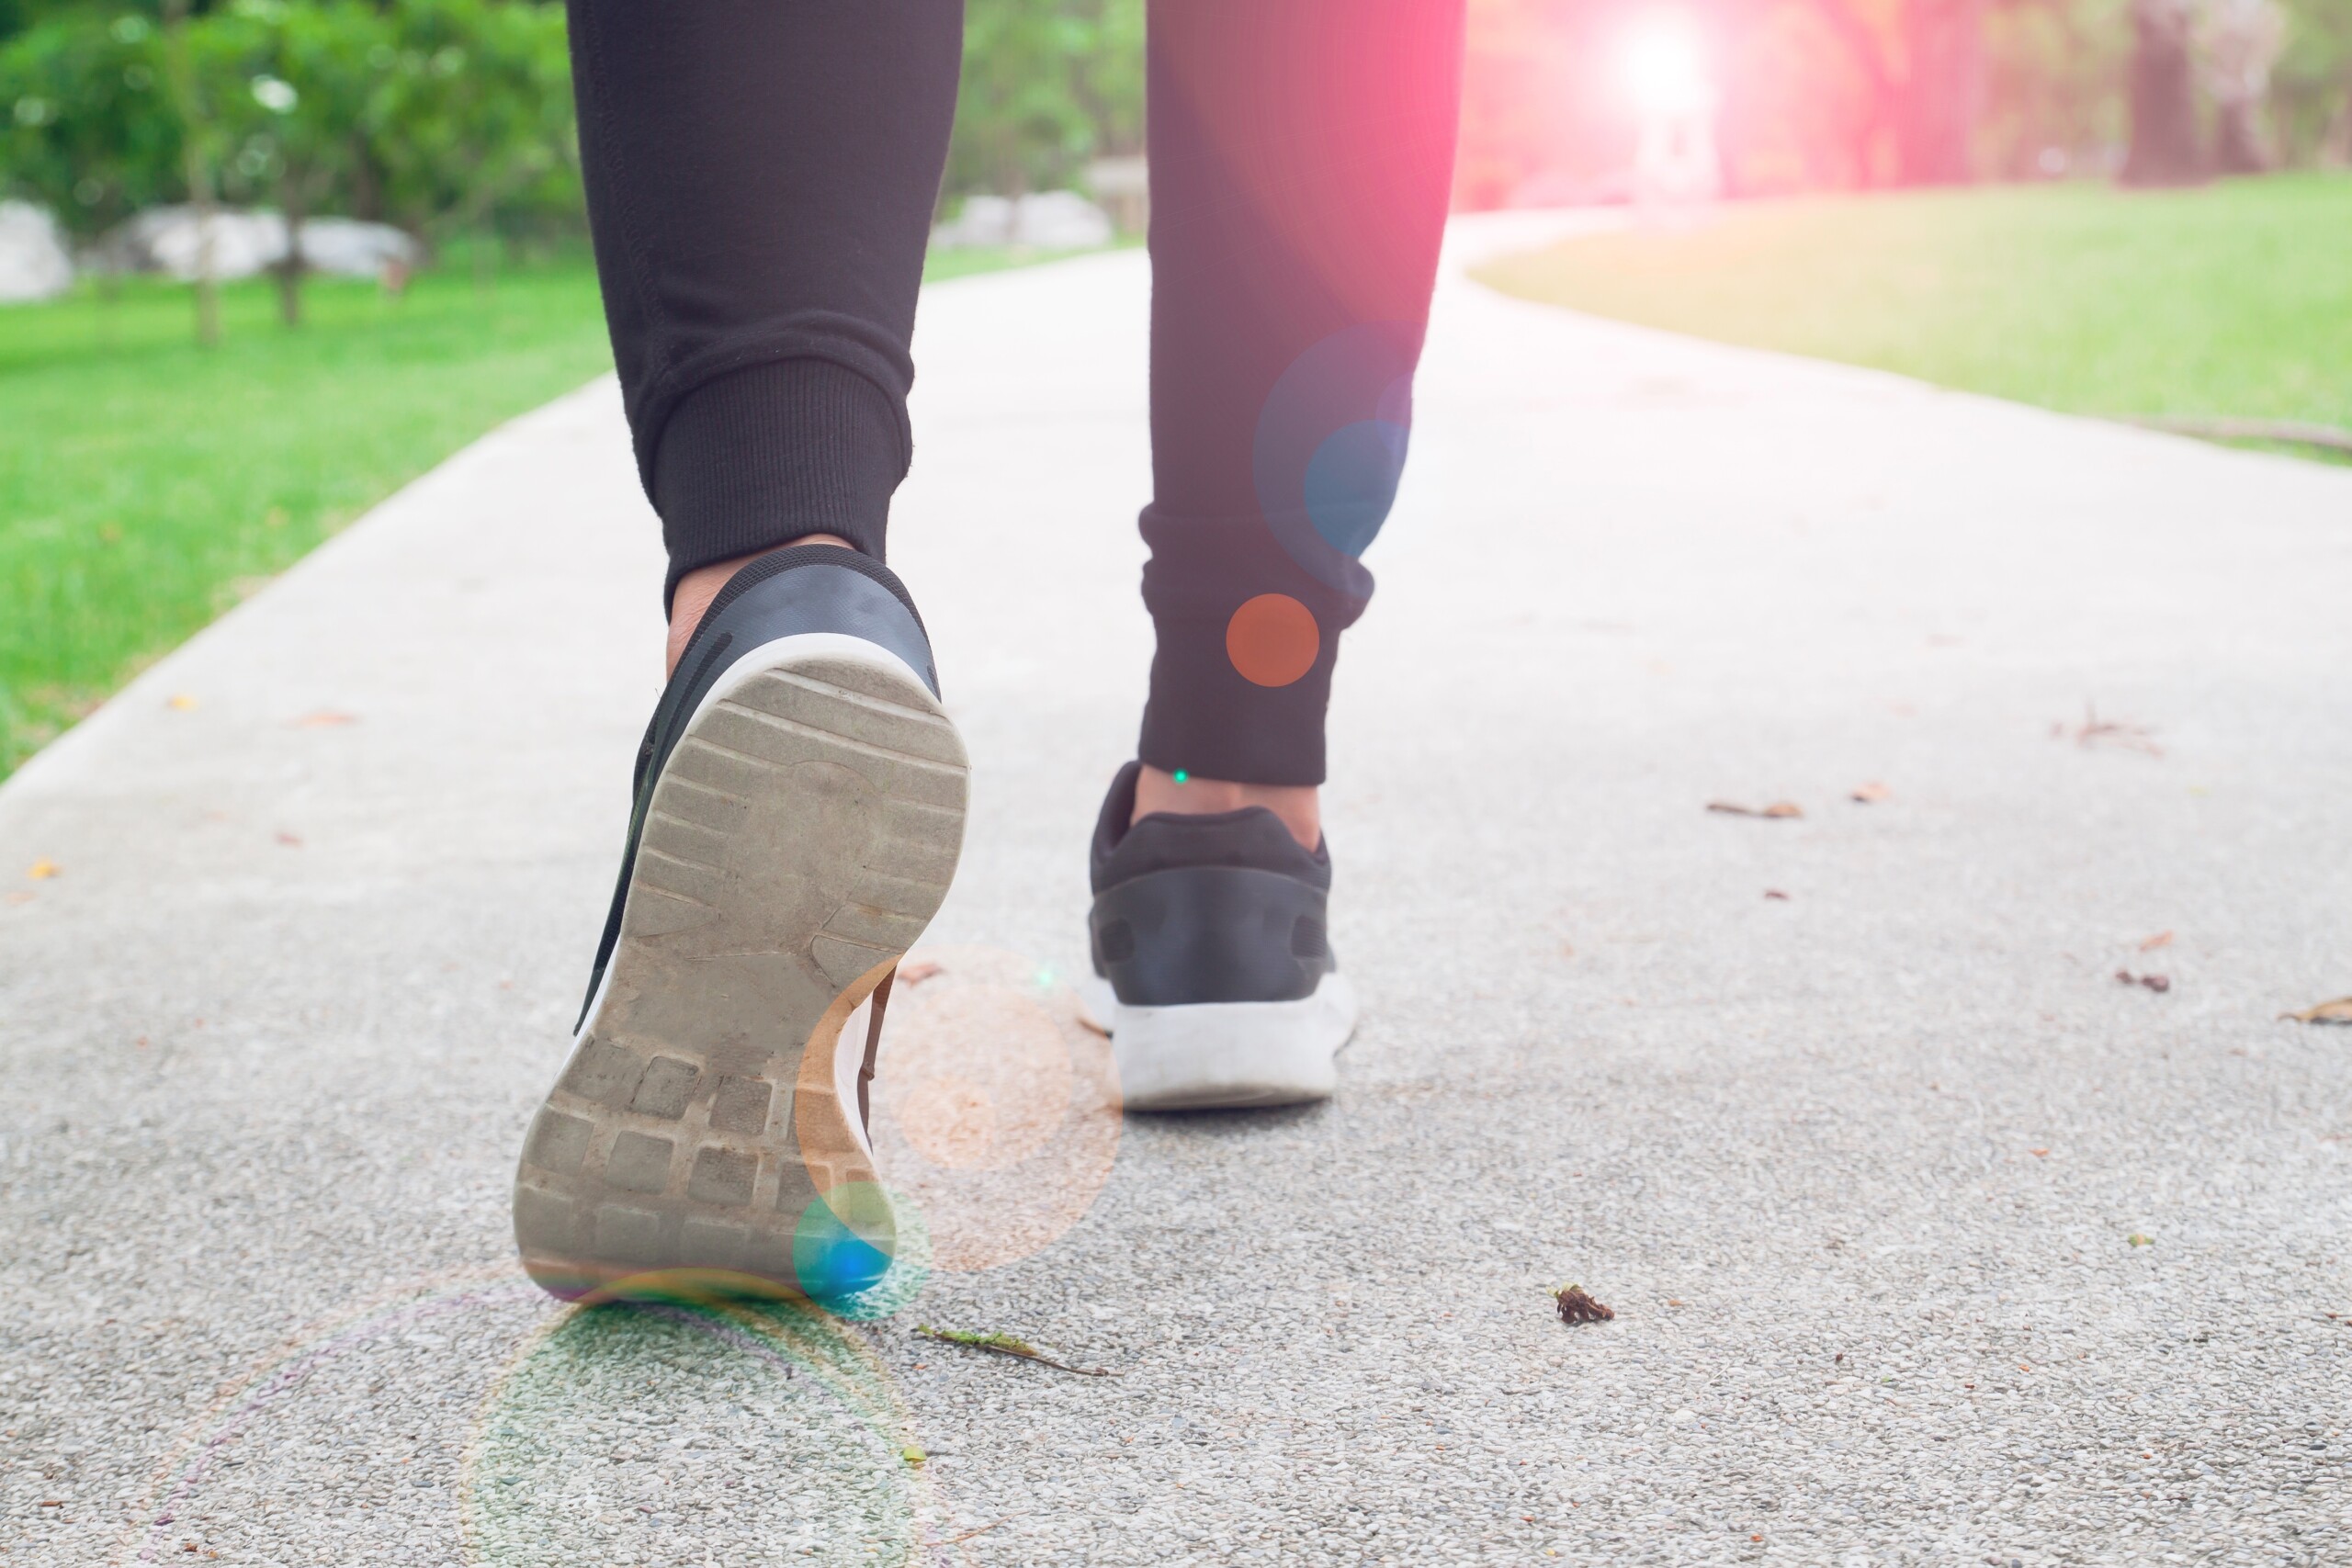 How Much Weight Can You Lose by Walking After Dinner?